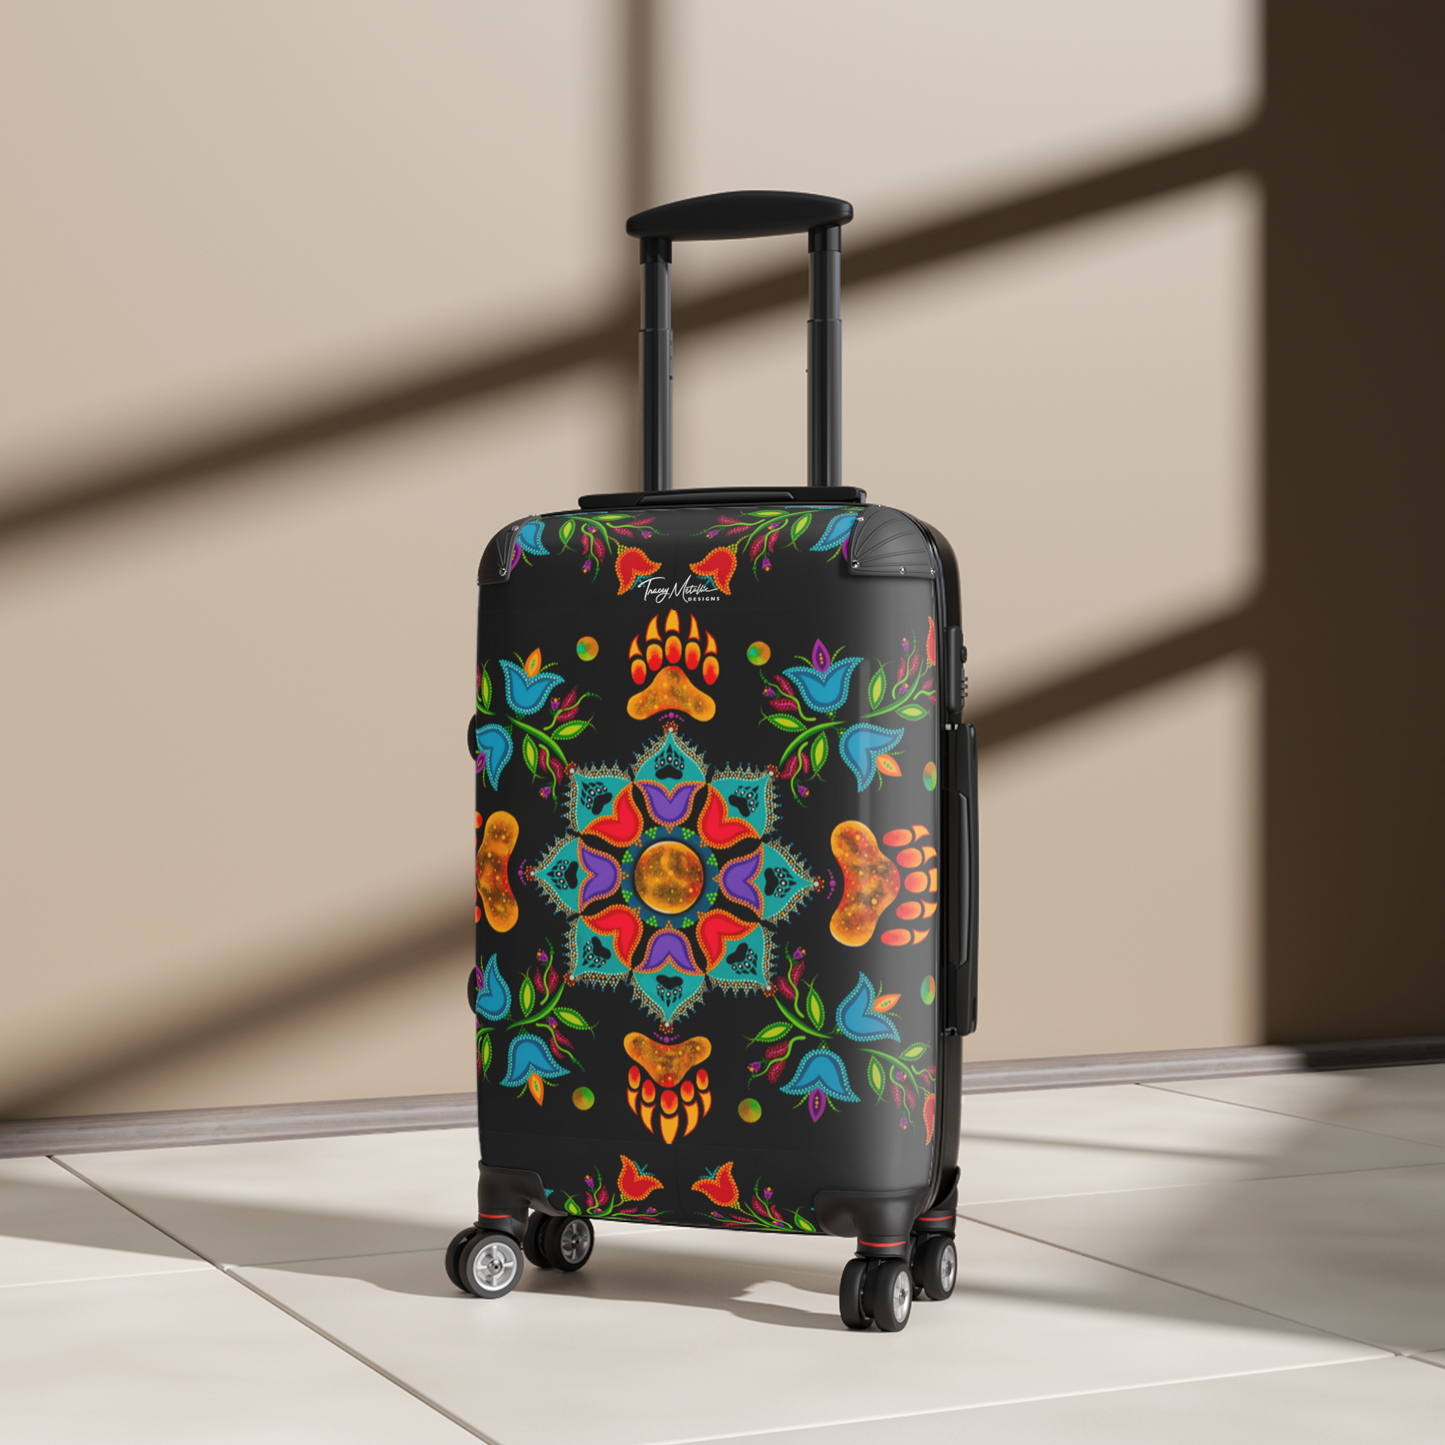 Travel in Style with Revelation Metallic Carry-On Luggage